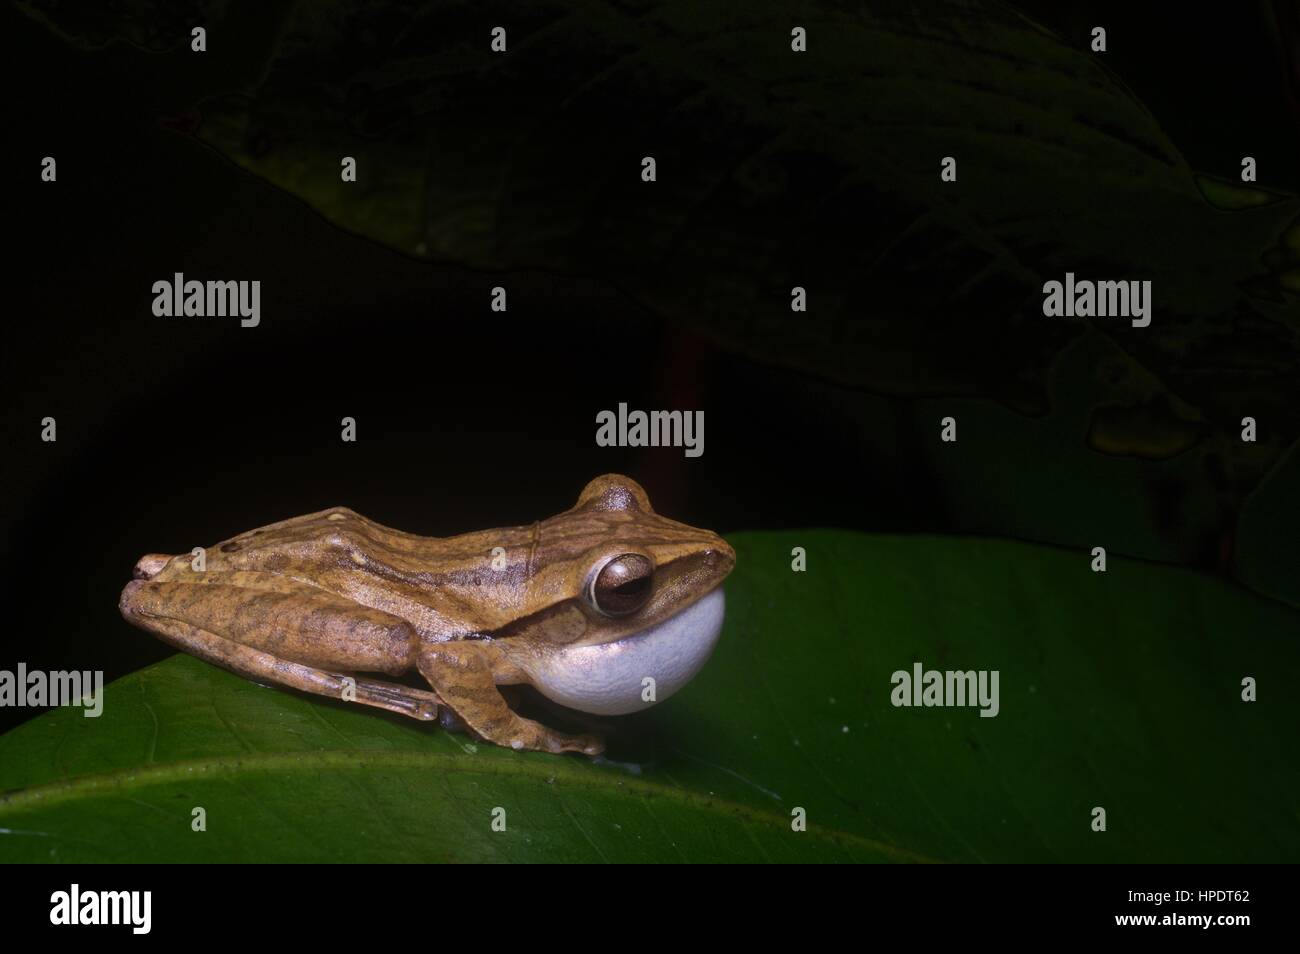 A calling male Four-lined Tree Frog (Polypedates leucomystax) in the rainforest at night in Kubah National Park, Sarawak, East Malaysia, Borneo Stock Photo